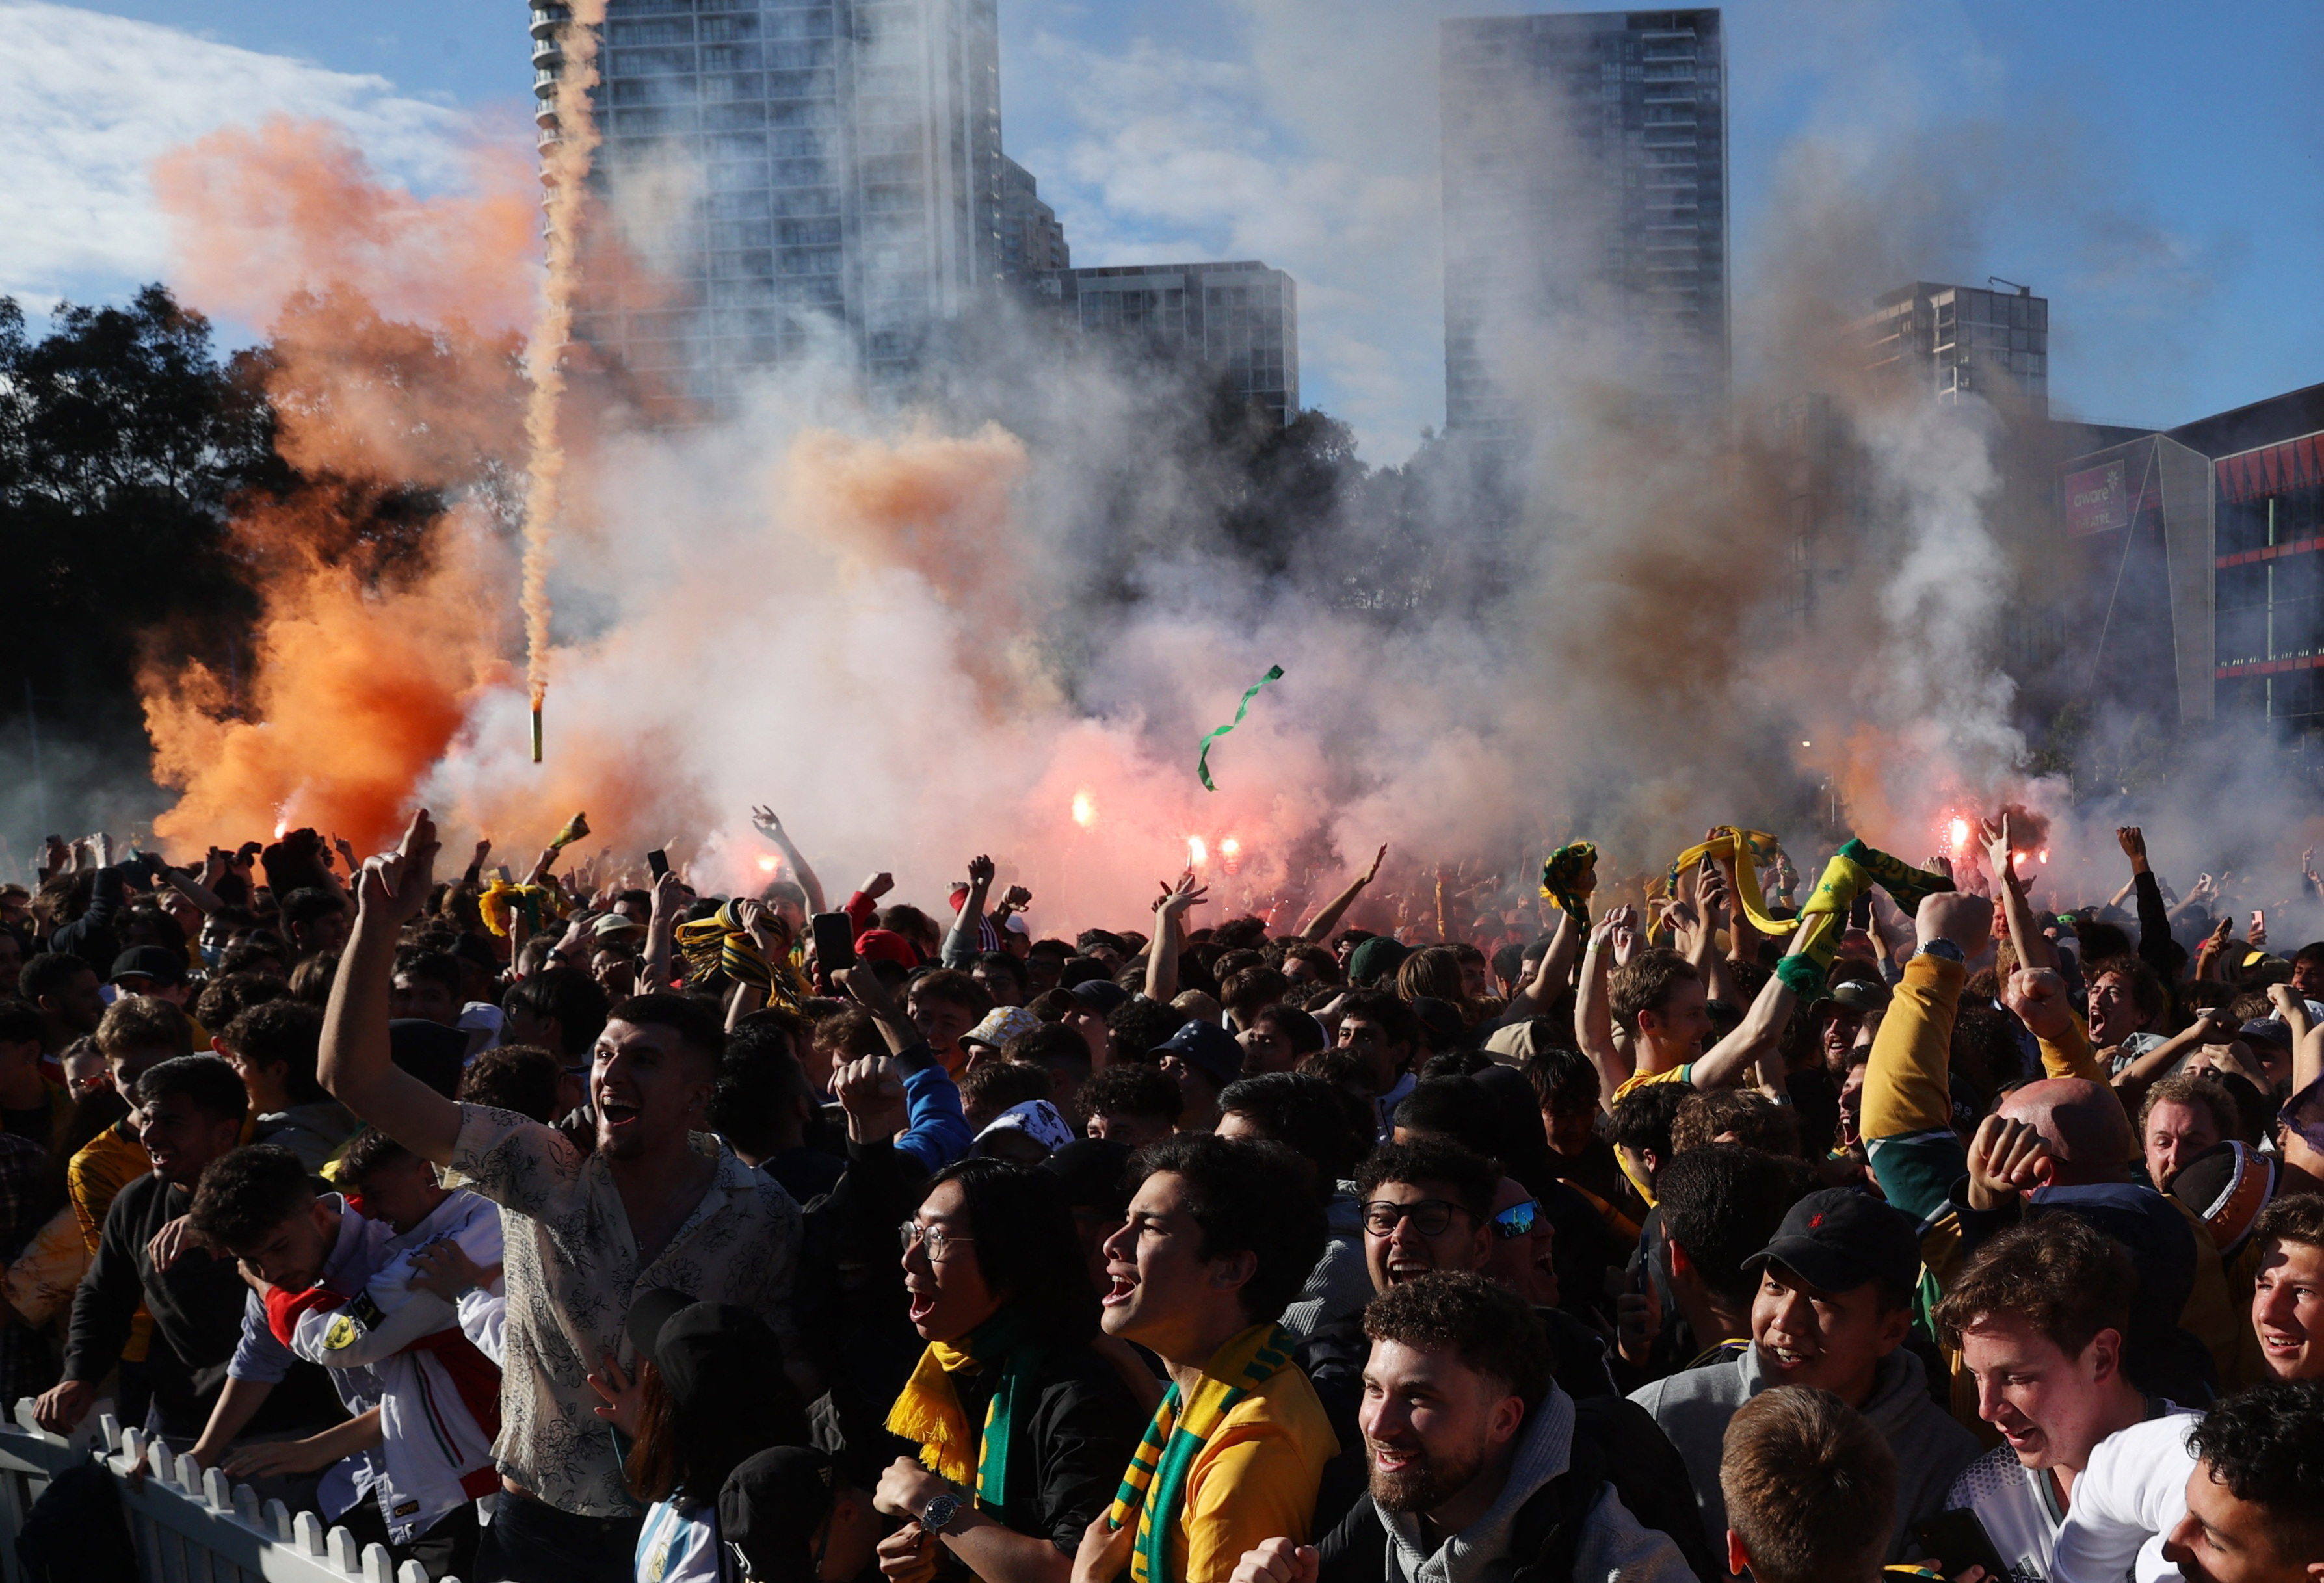 Australia fans celebrate their first goal during the match between Australia and Argentina in Sydney, Australia on Sunday, December 4.